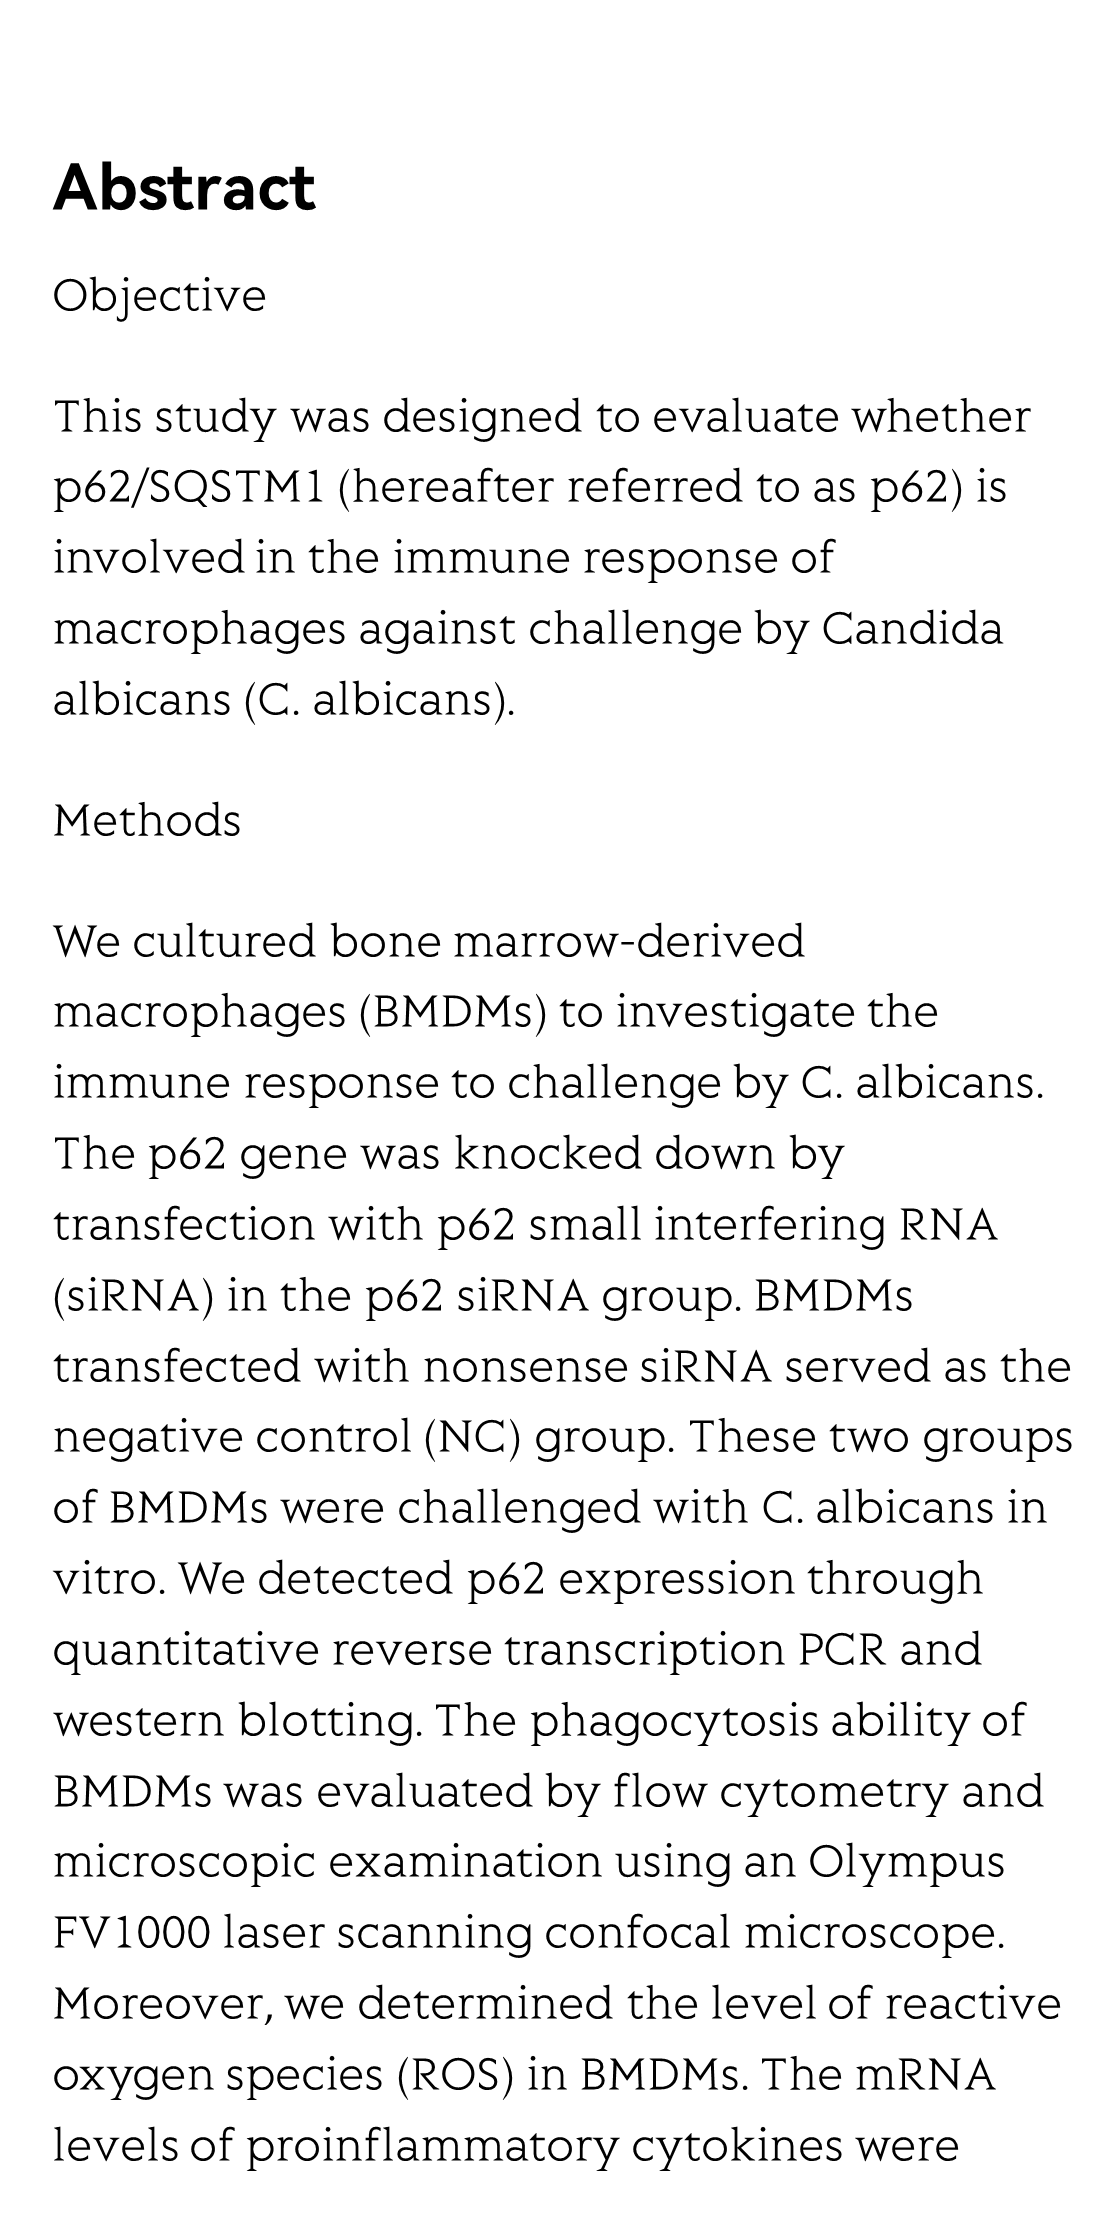 p62/SQSTM1 Participates in the Innate Immune Response of Macrophages Against Candida albicans Infection_2